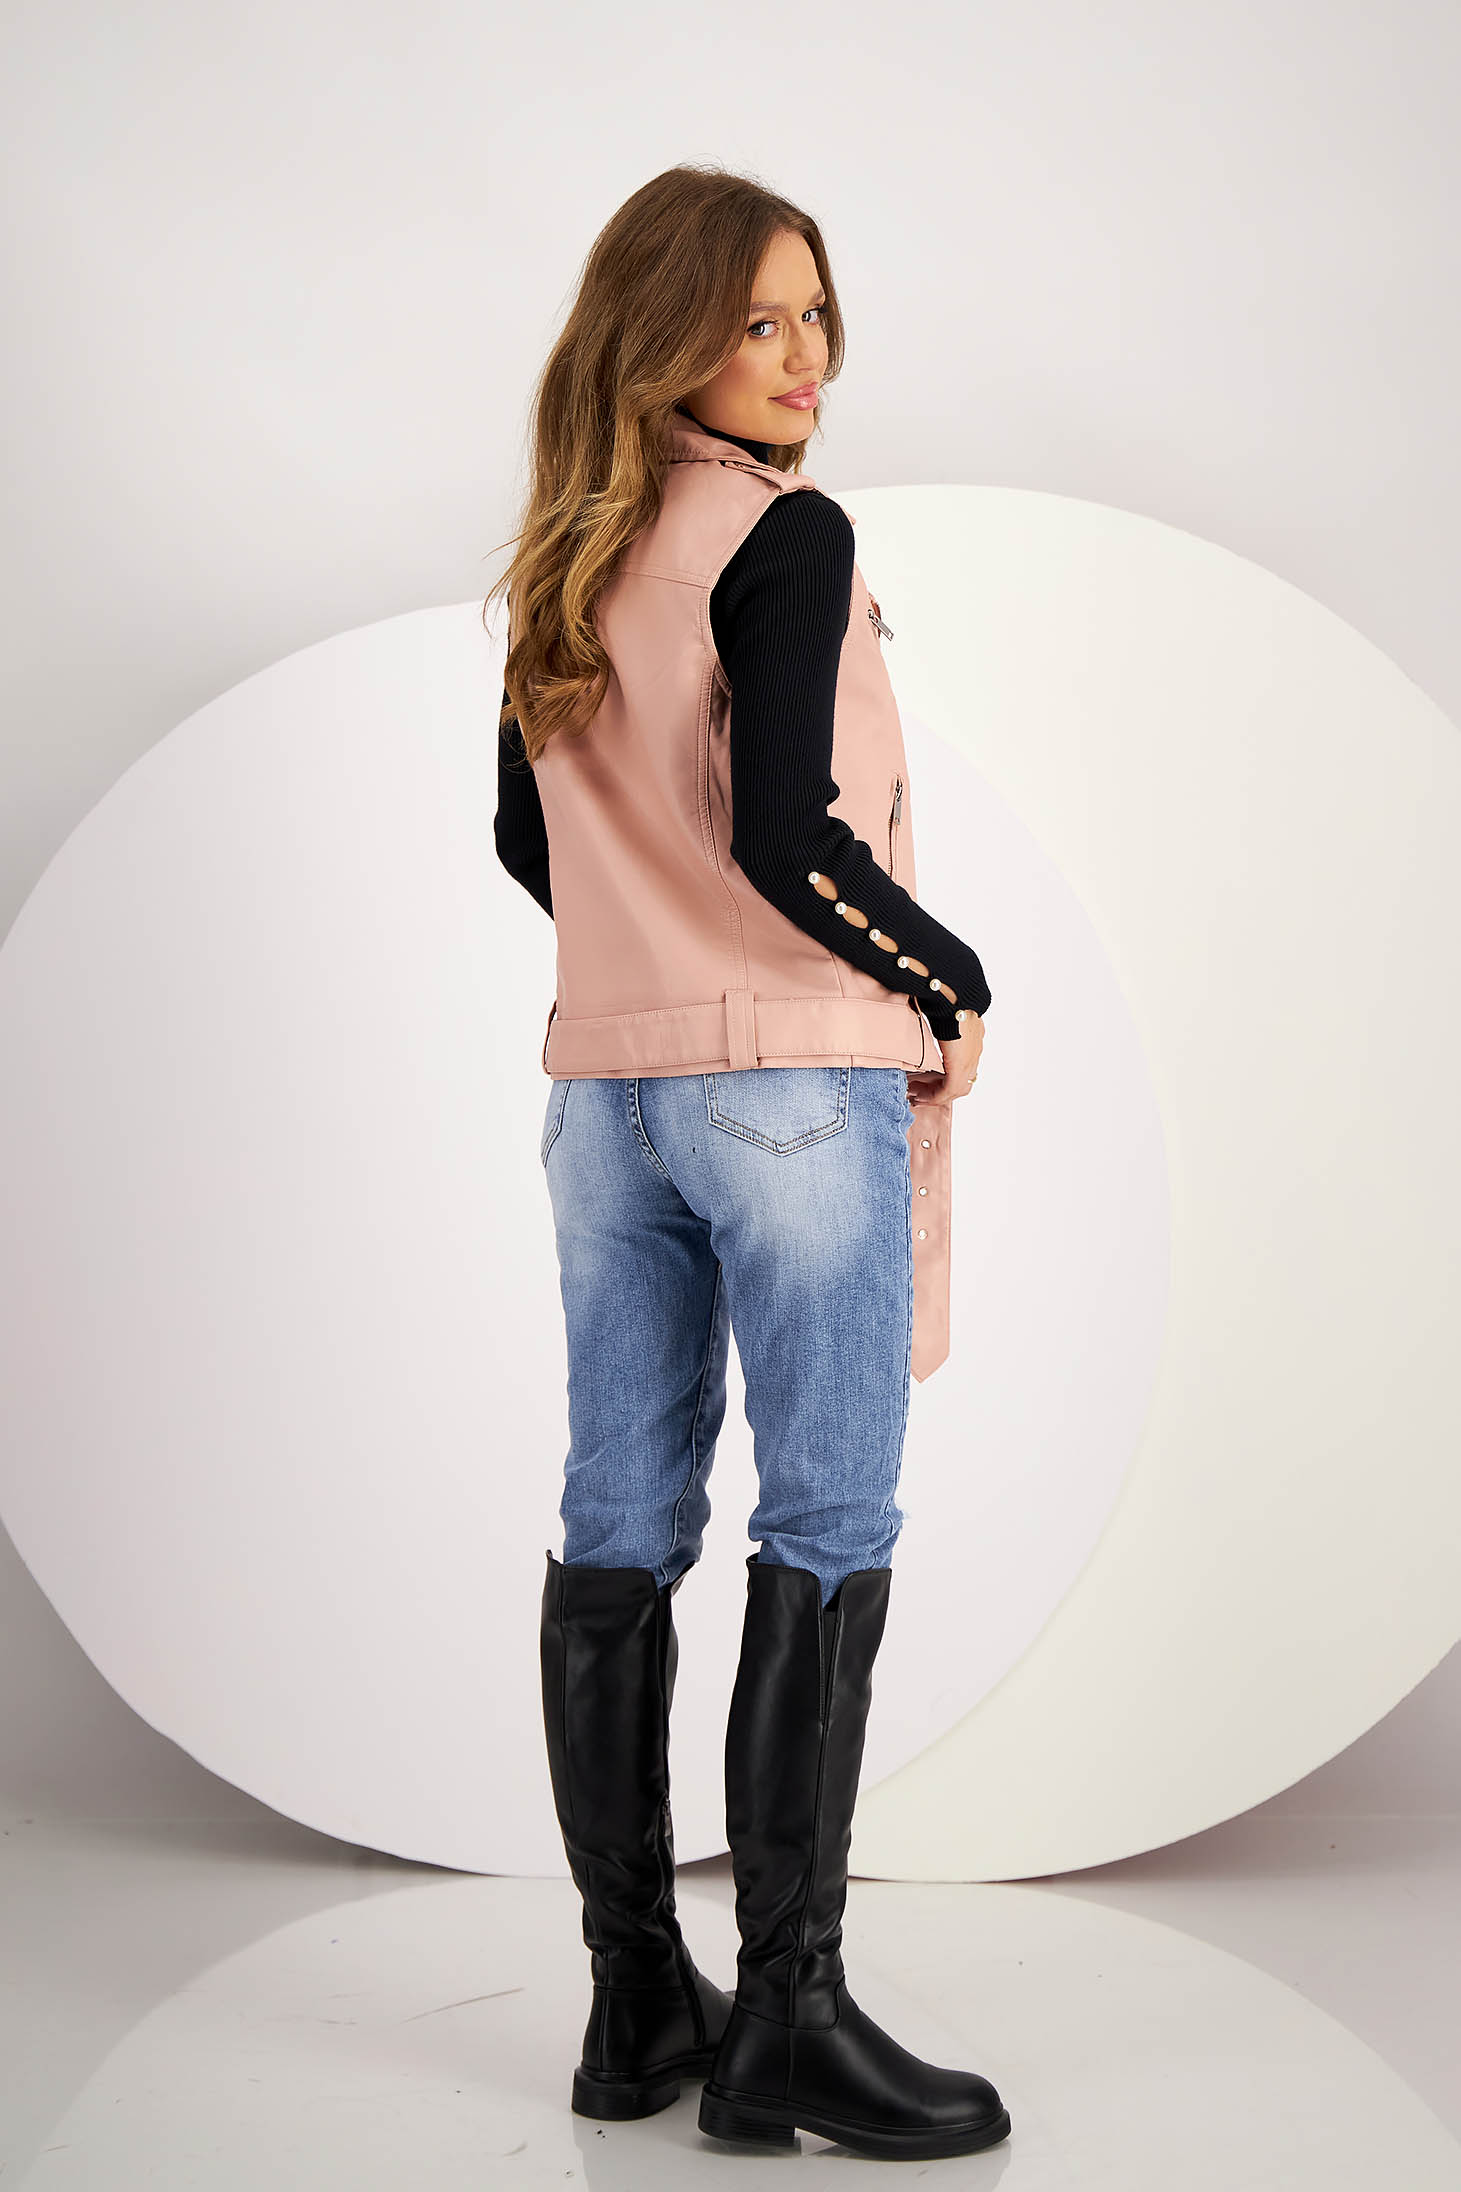 Dusty Pink Faux Leather Biker Vest accessorized with zippers - SunShine 5 - StarShinerS.com